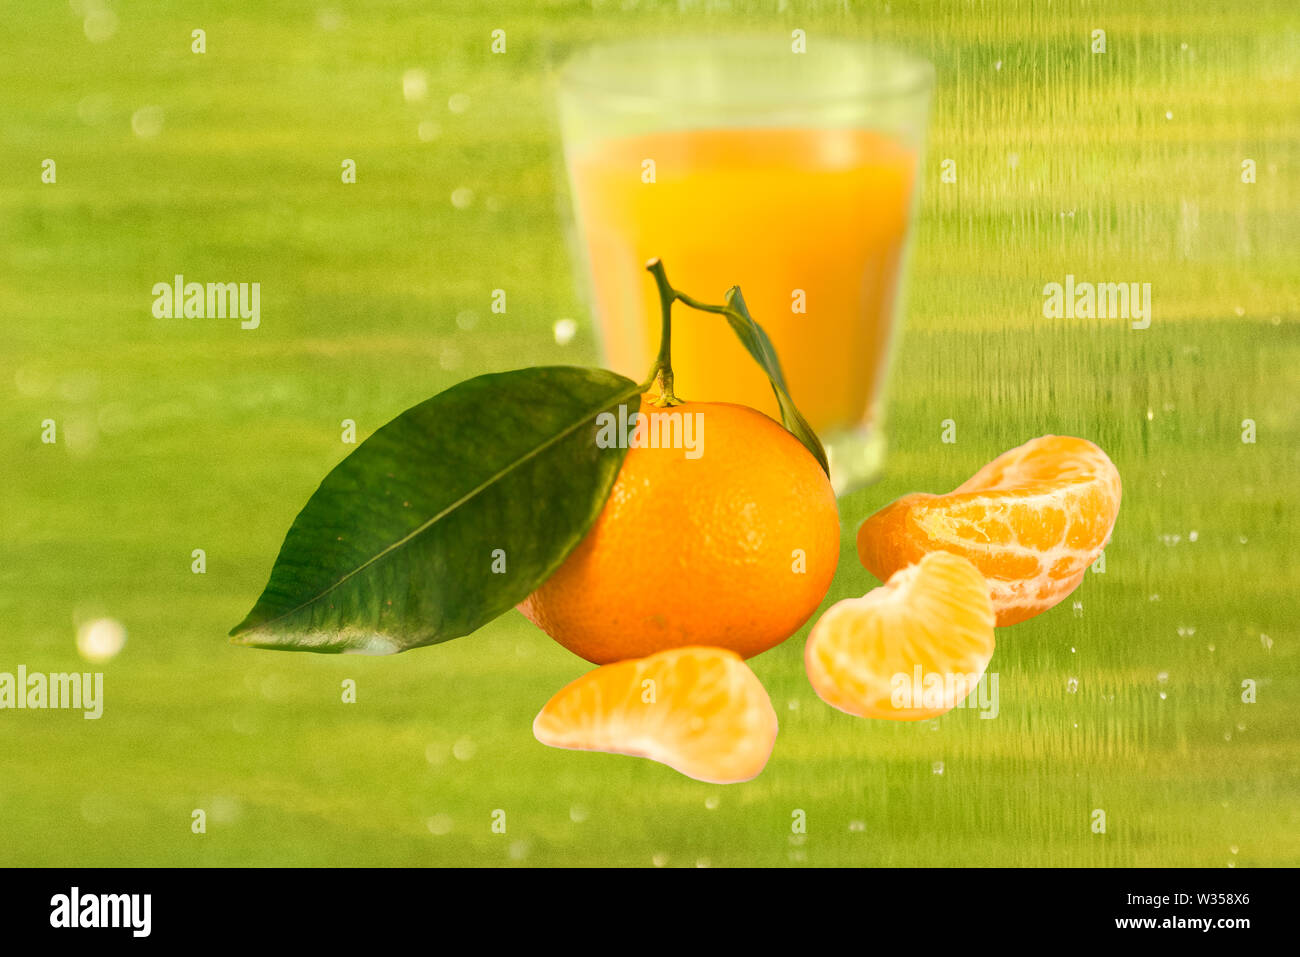 Leafy clementine, peeled clementine and glass of clementine juice on a watery green background. Stock Photo